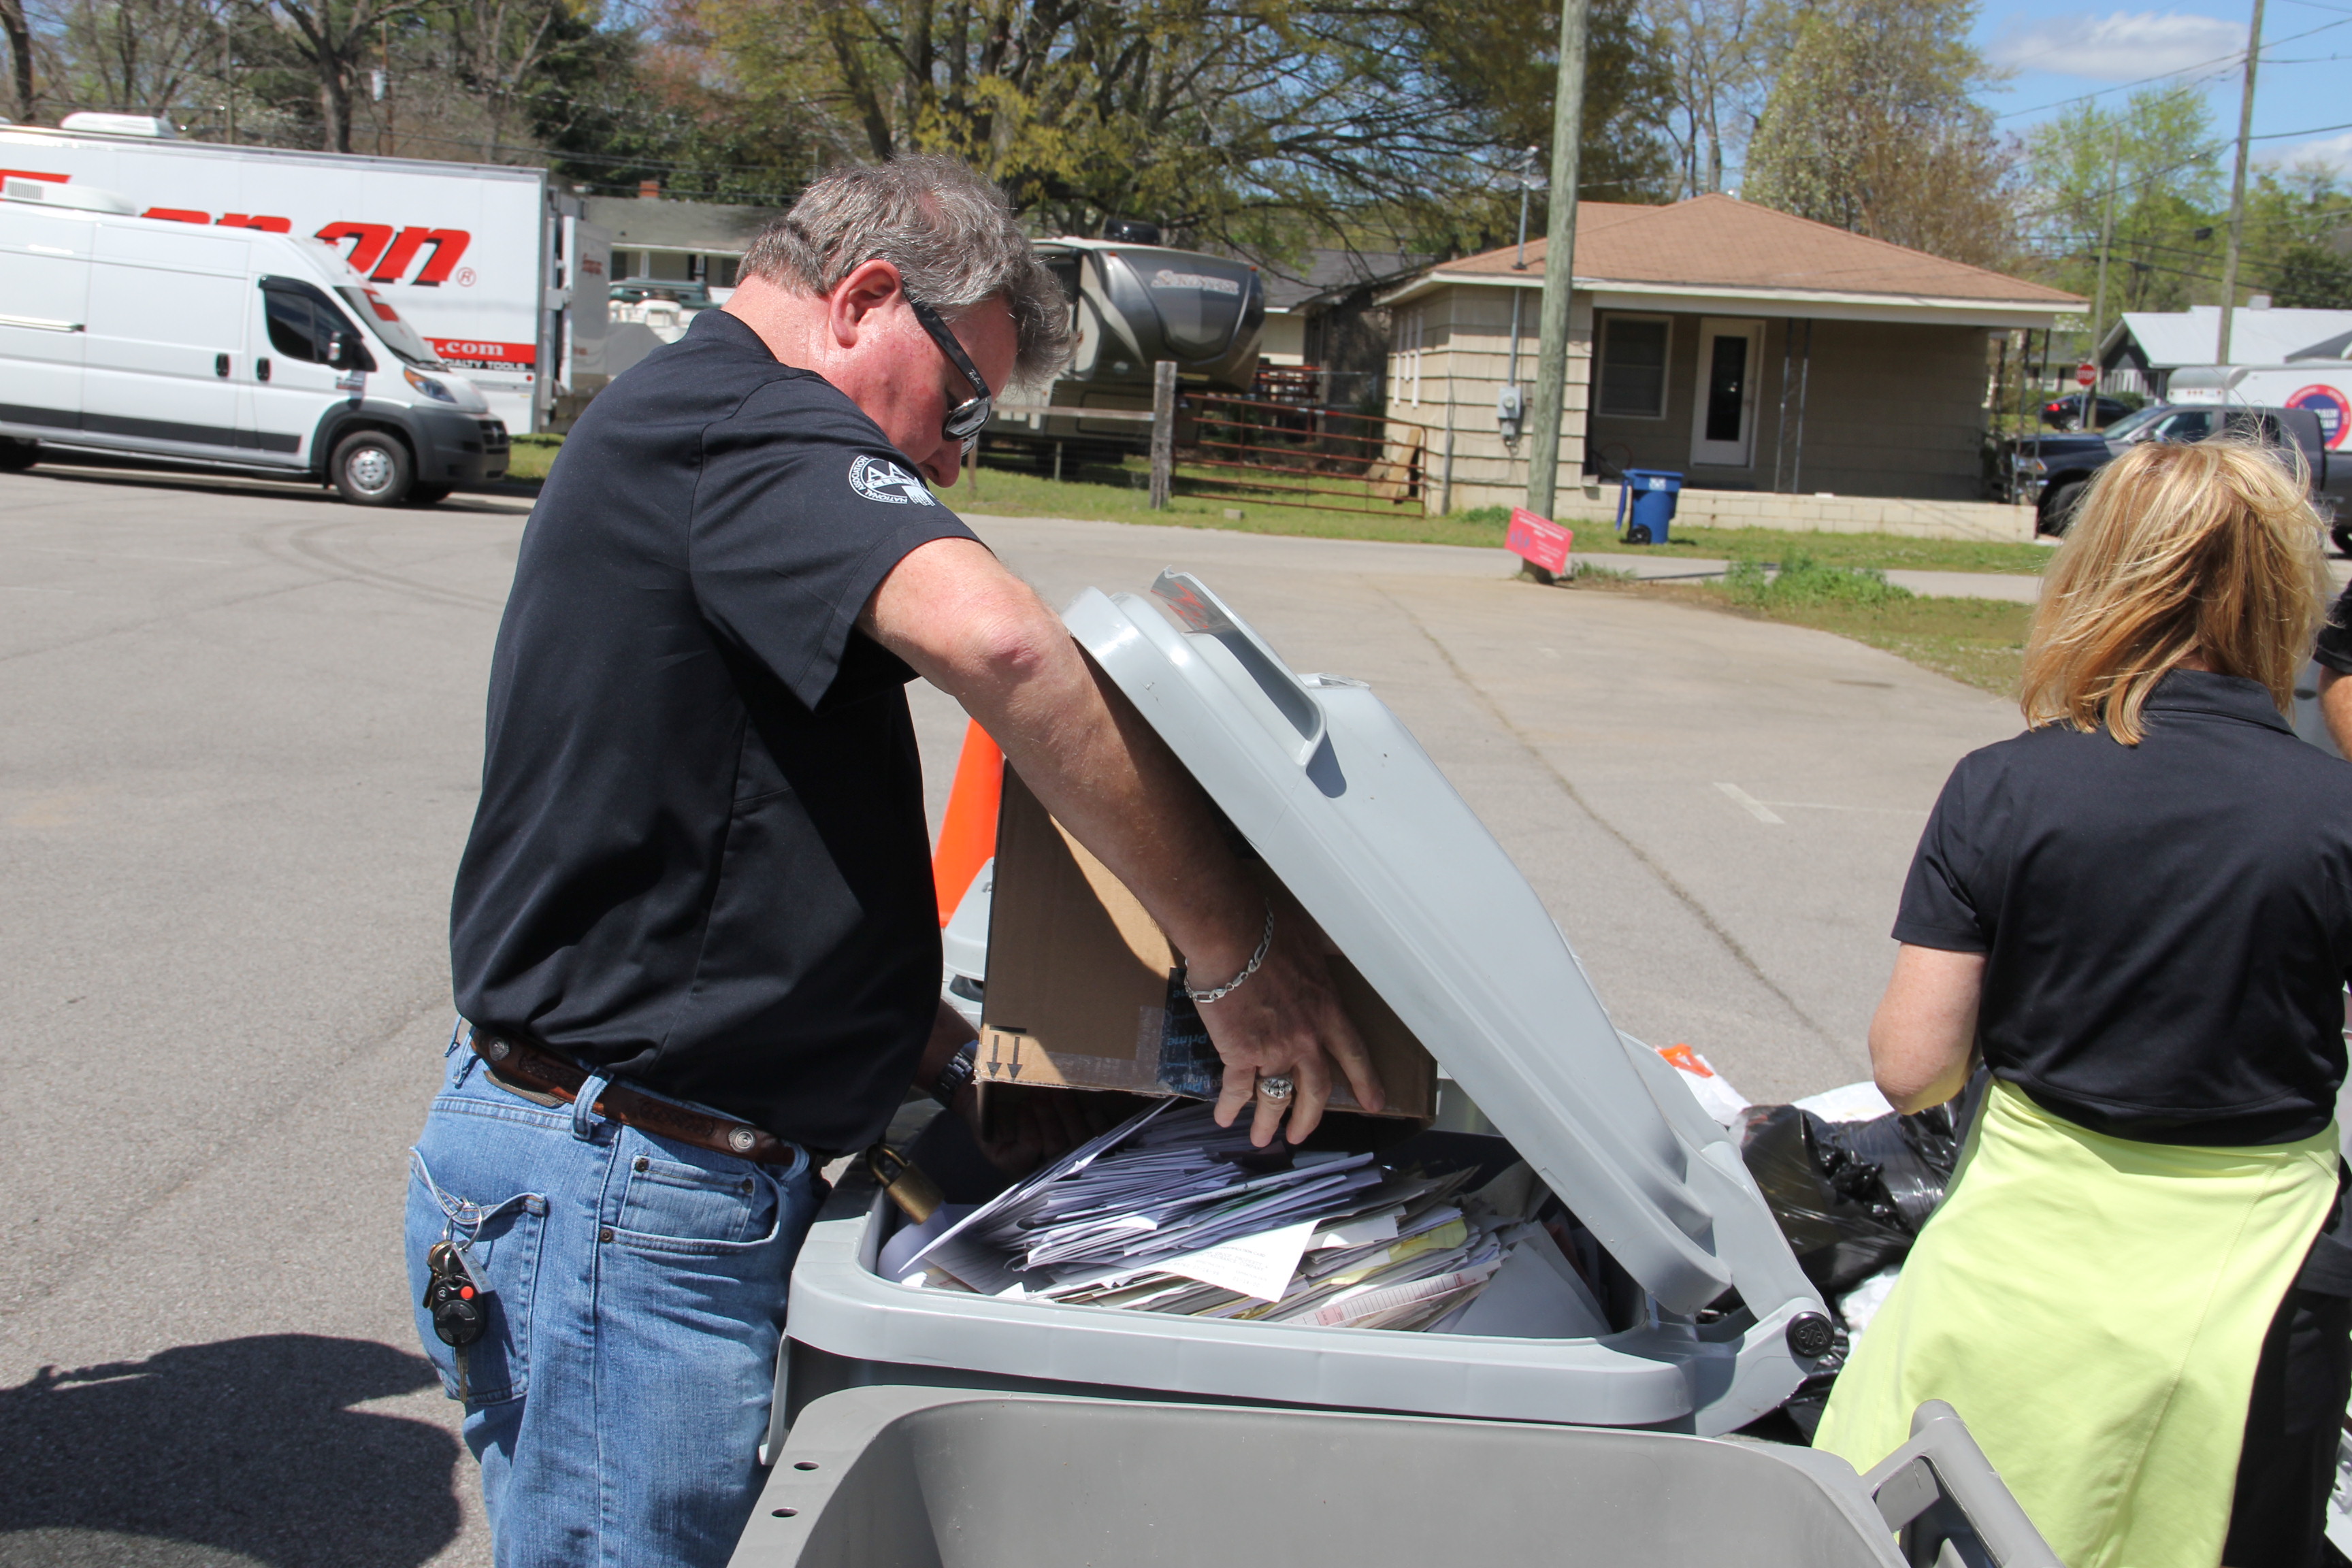 Free shred event a success in Trussville; second shred event scheduled in April